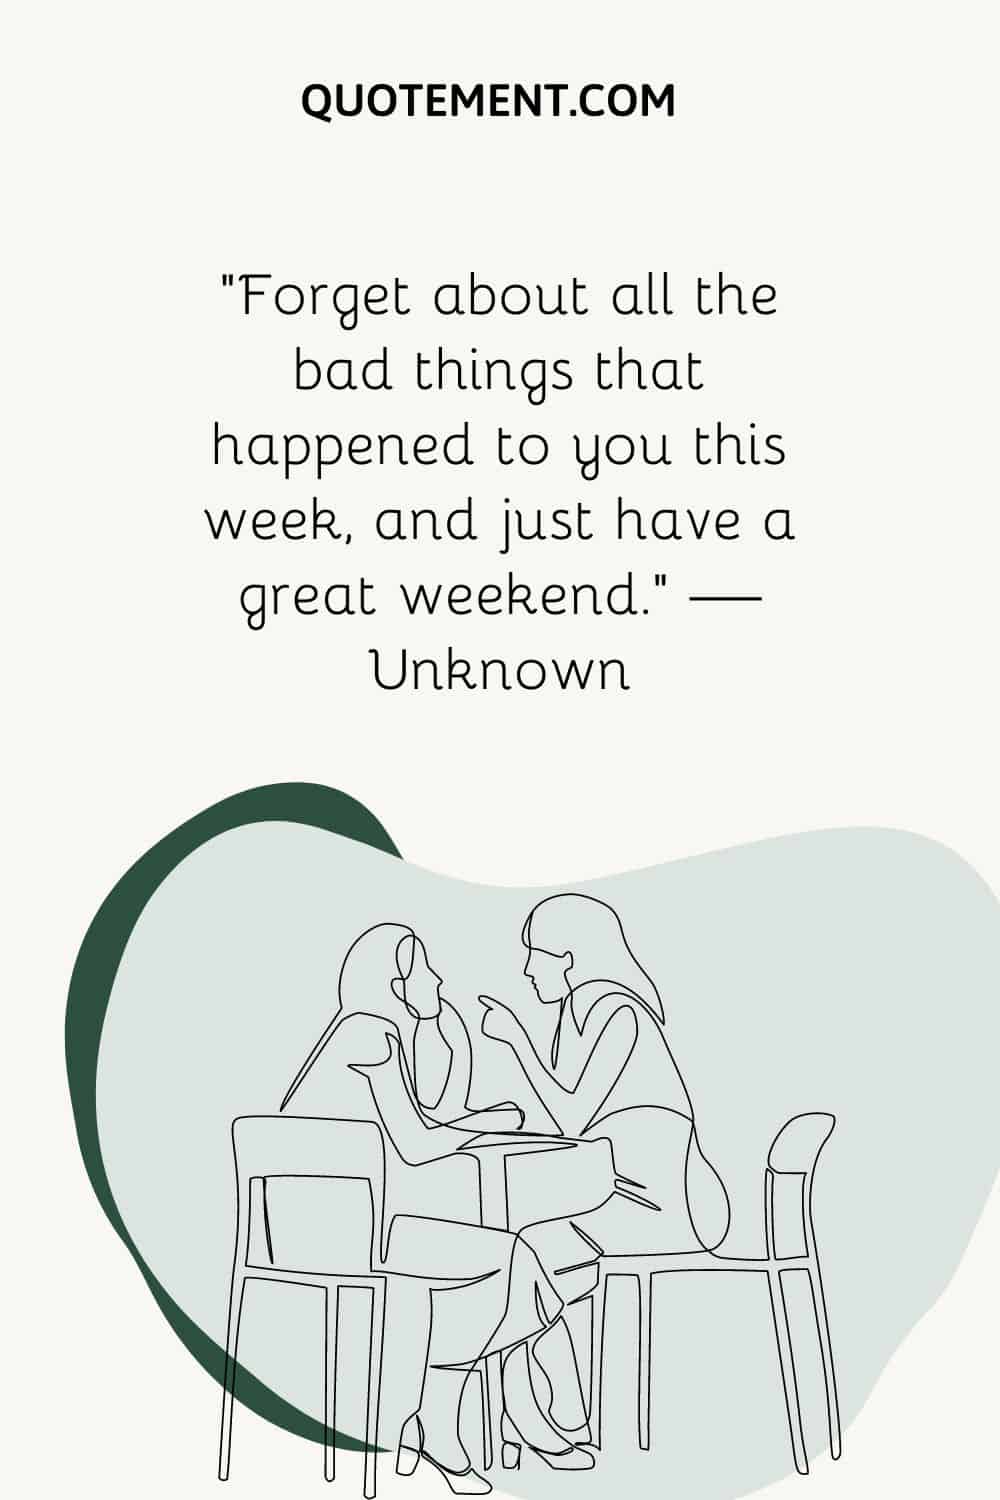 illustration of two women sitting representing great weekend quote